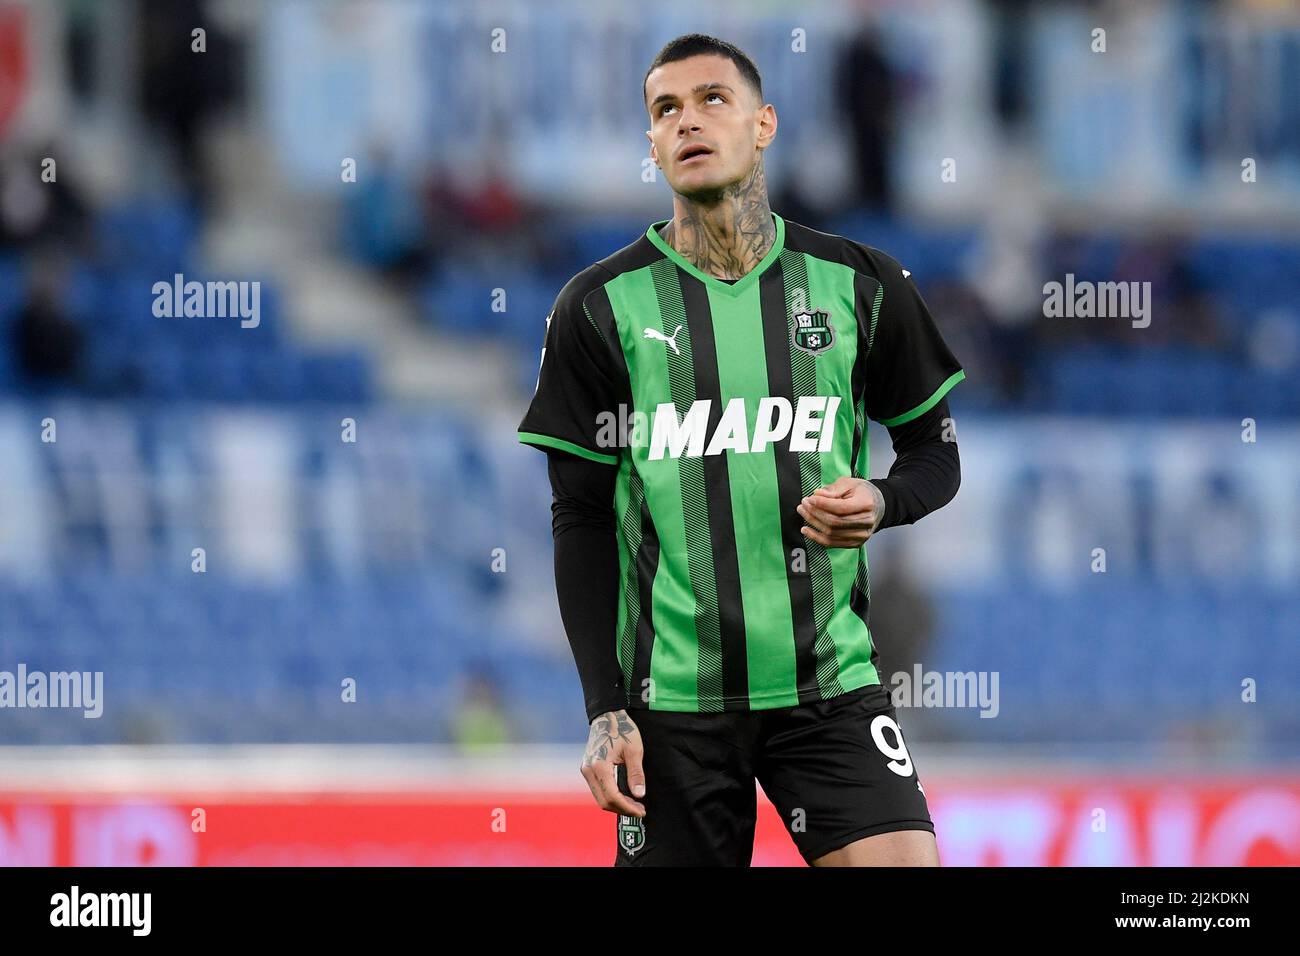 Roma, Italy. 02nd Apr, 2022. Gianluca Scamacca of Sassuolo during the Serie  A football match between SS Lazio and Unione Sportiva Sassuolo Calcio at  Olimpico stadium in Rome (Italy), March 2nd, 2022.